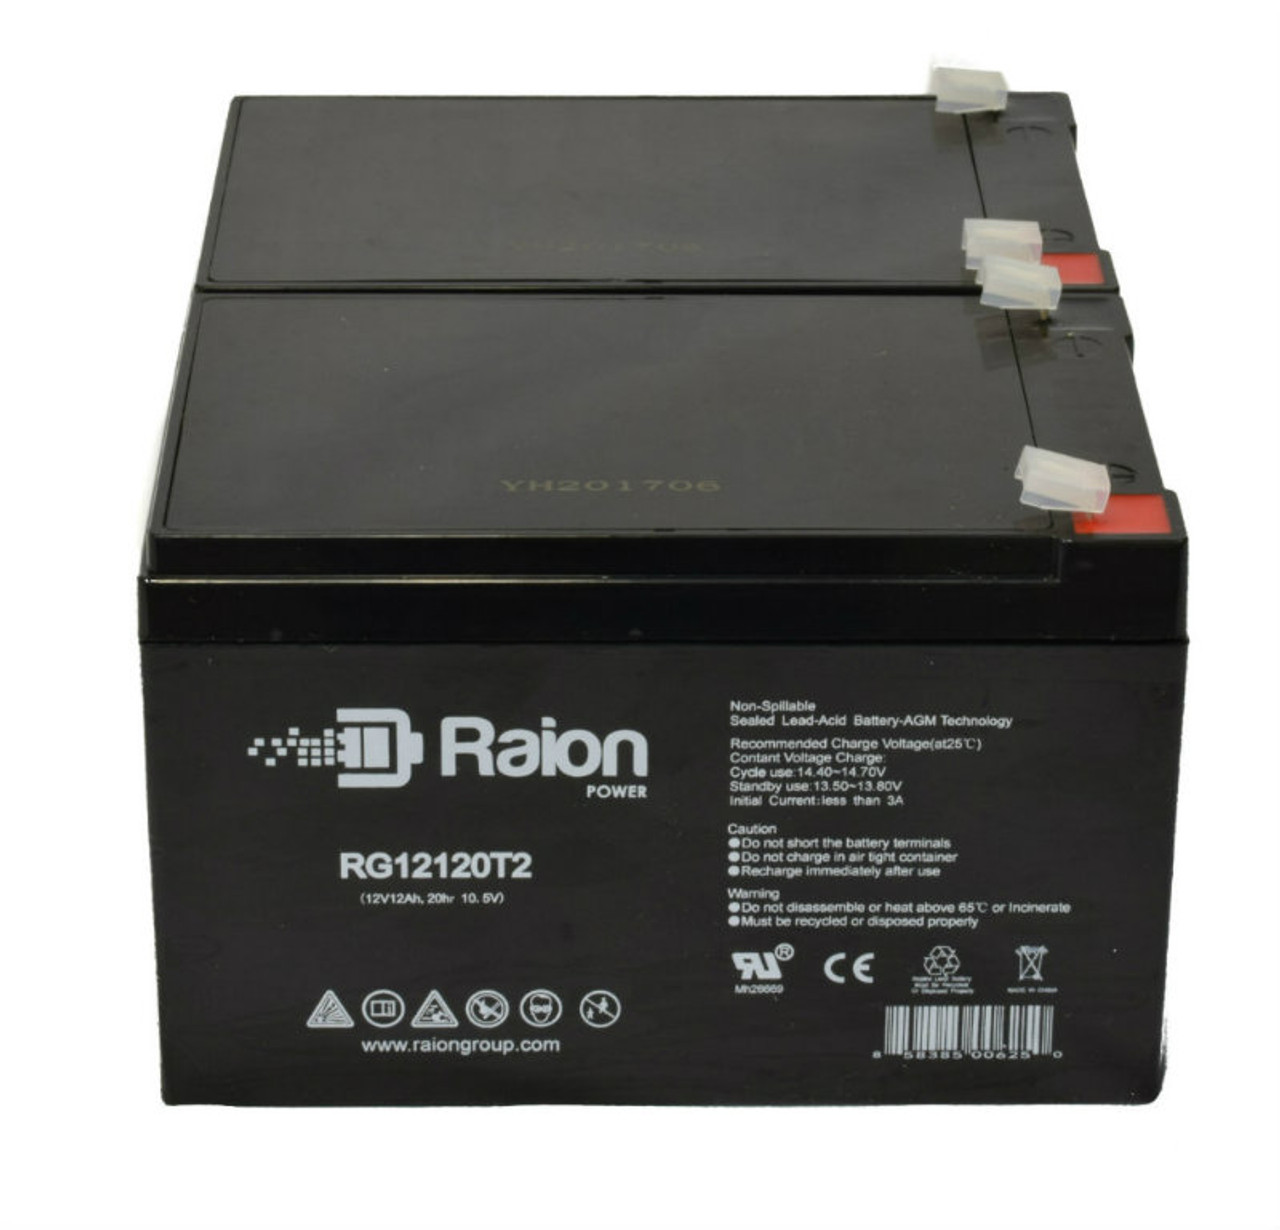 Raion Power 12V 12Ah Non-Spillable Compatible Replacement Battery for Axyl AXB12100 - (2 Pack)